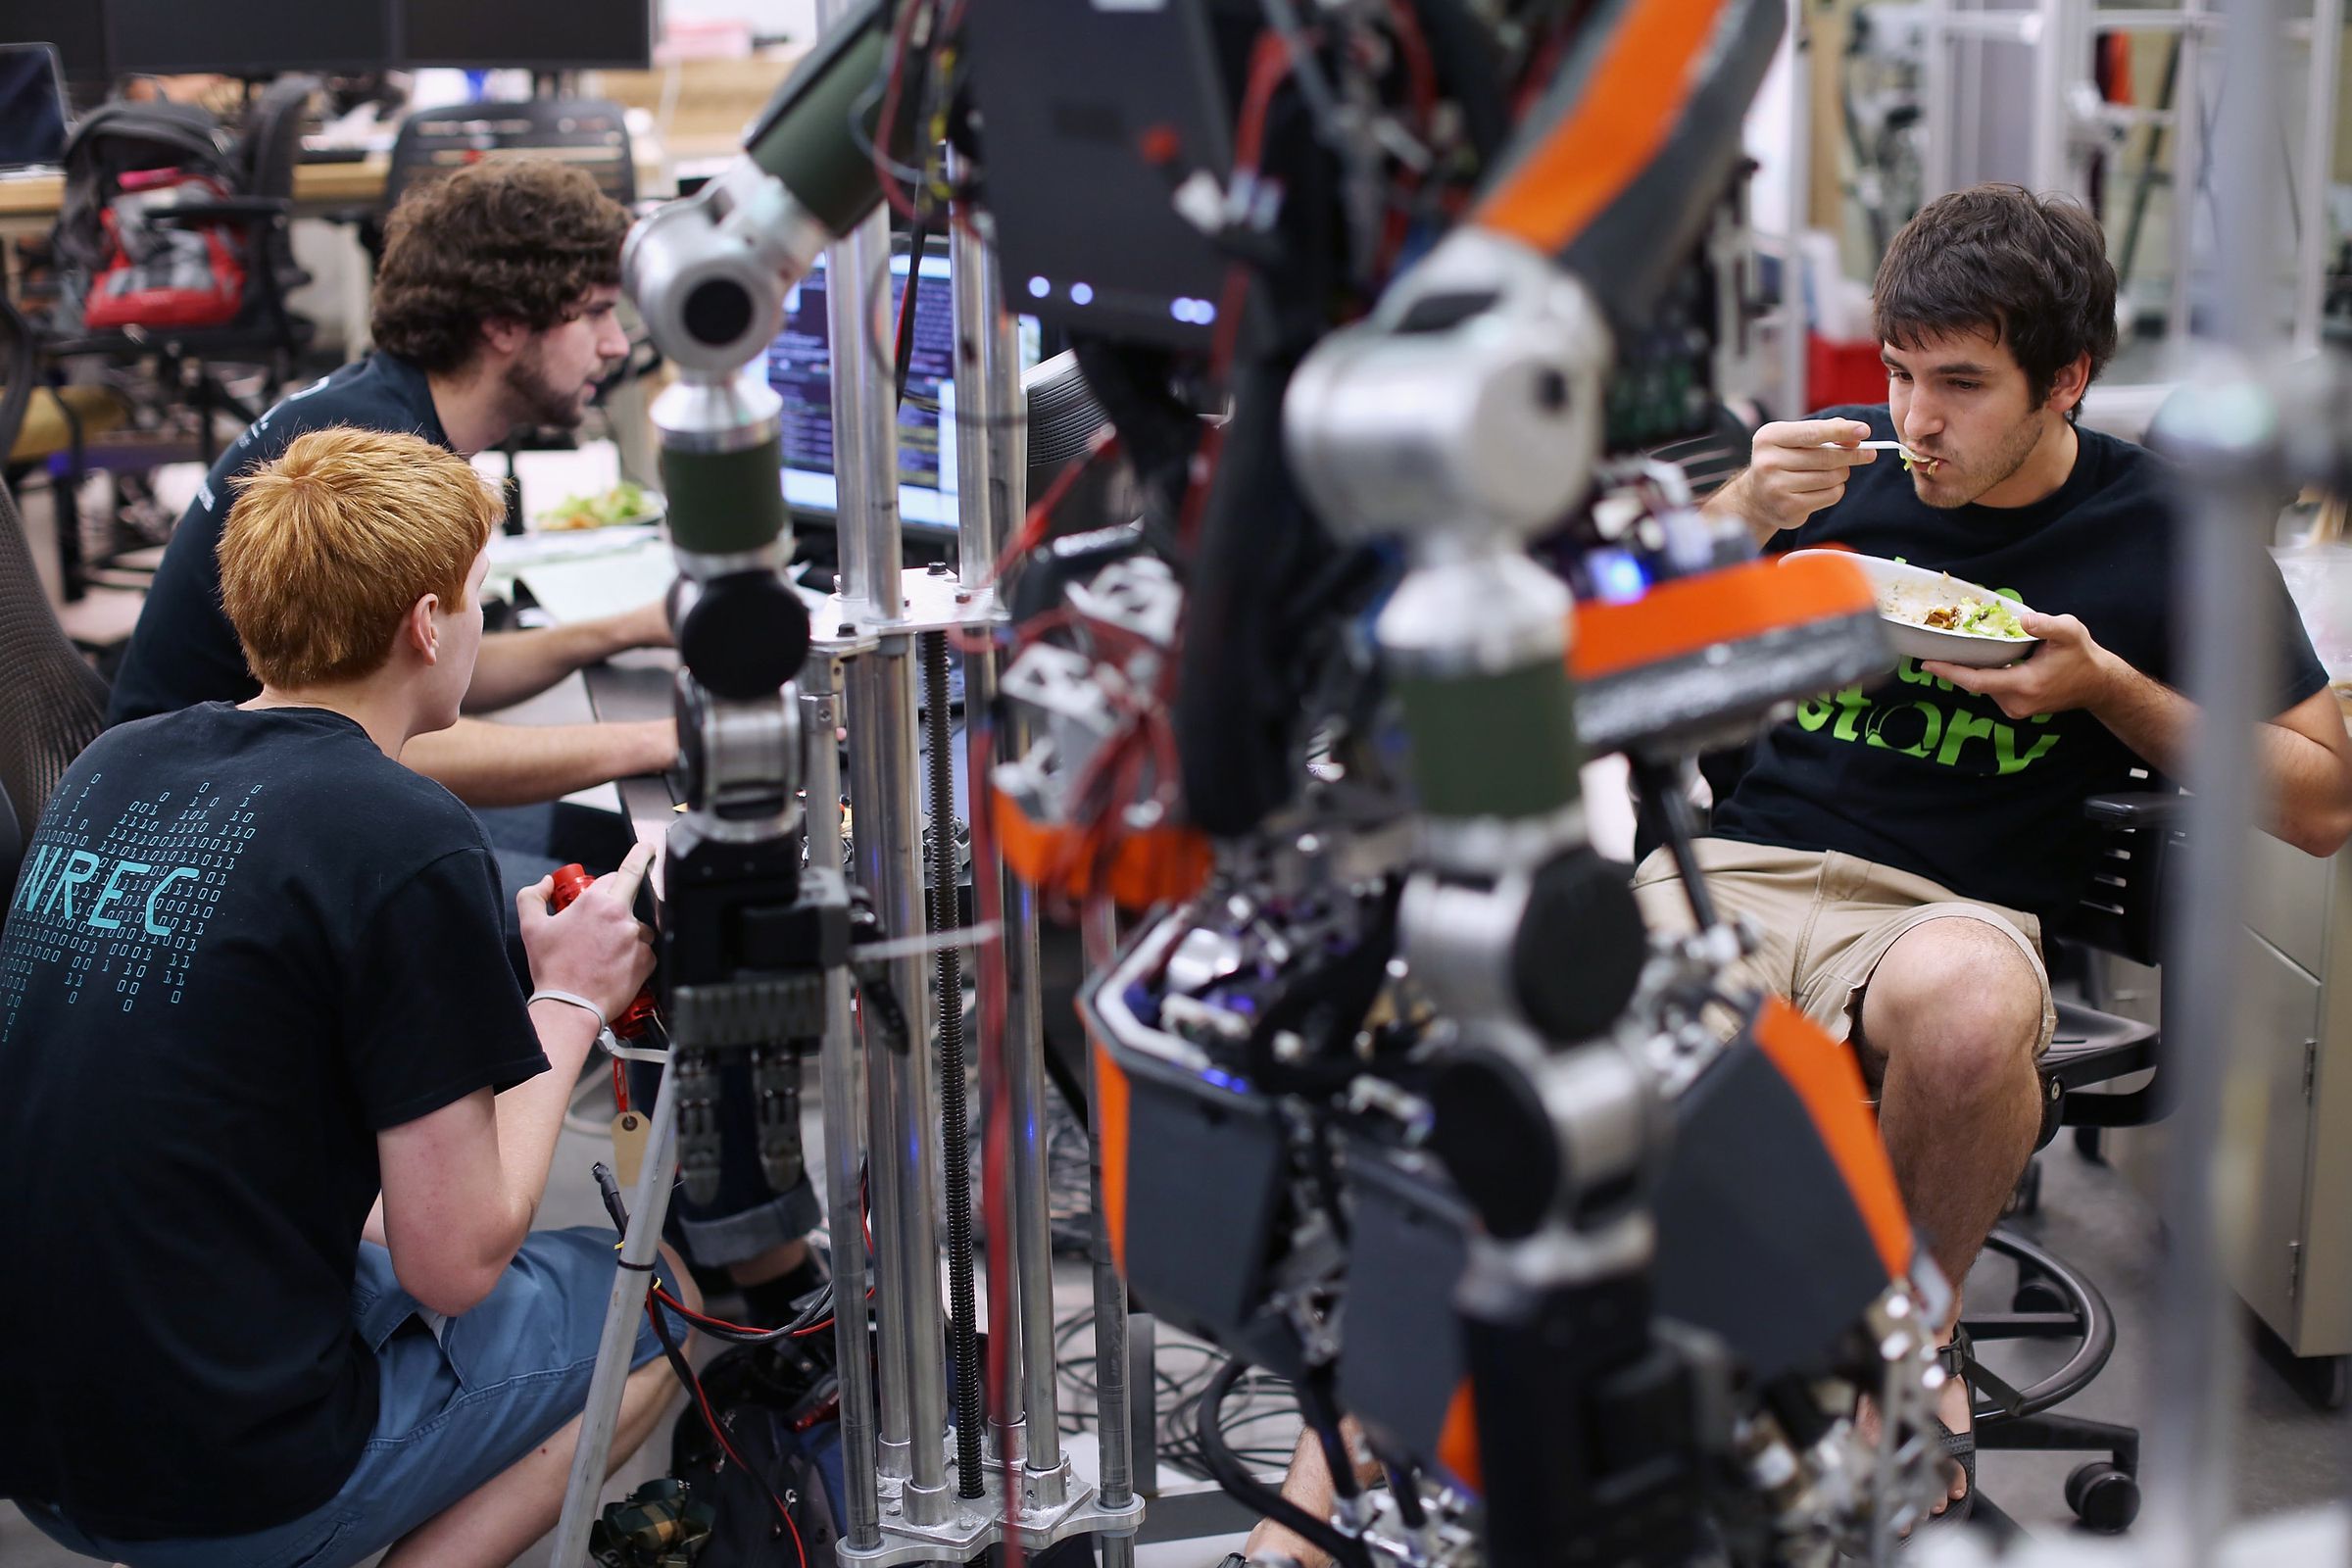 Researchers And Virginia Tech Students Prepare For DARPA Robotics Challenge